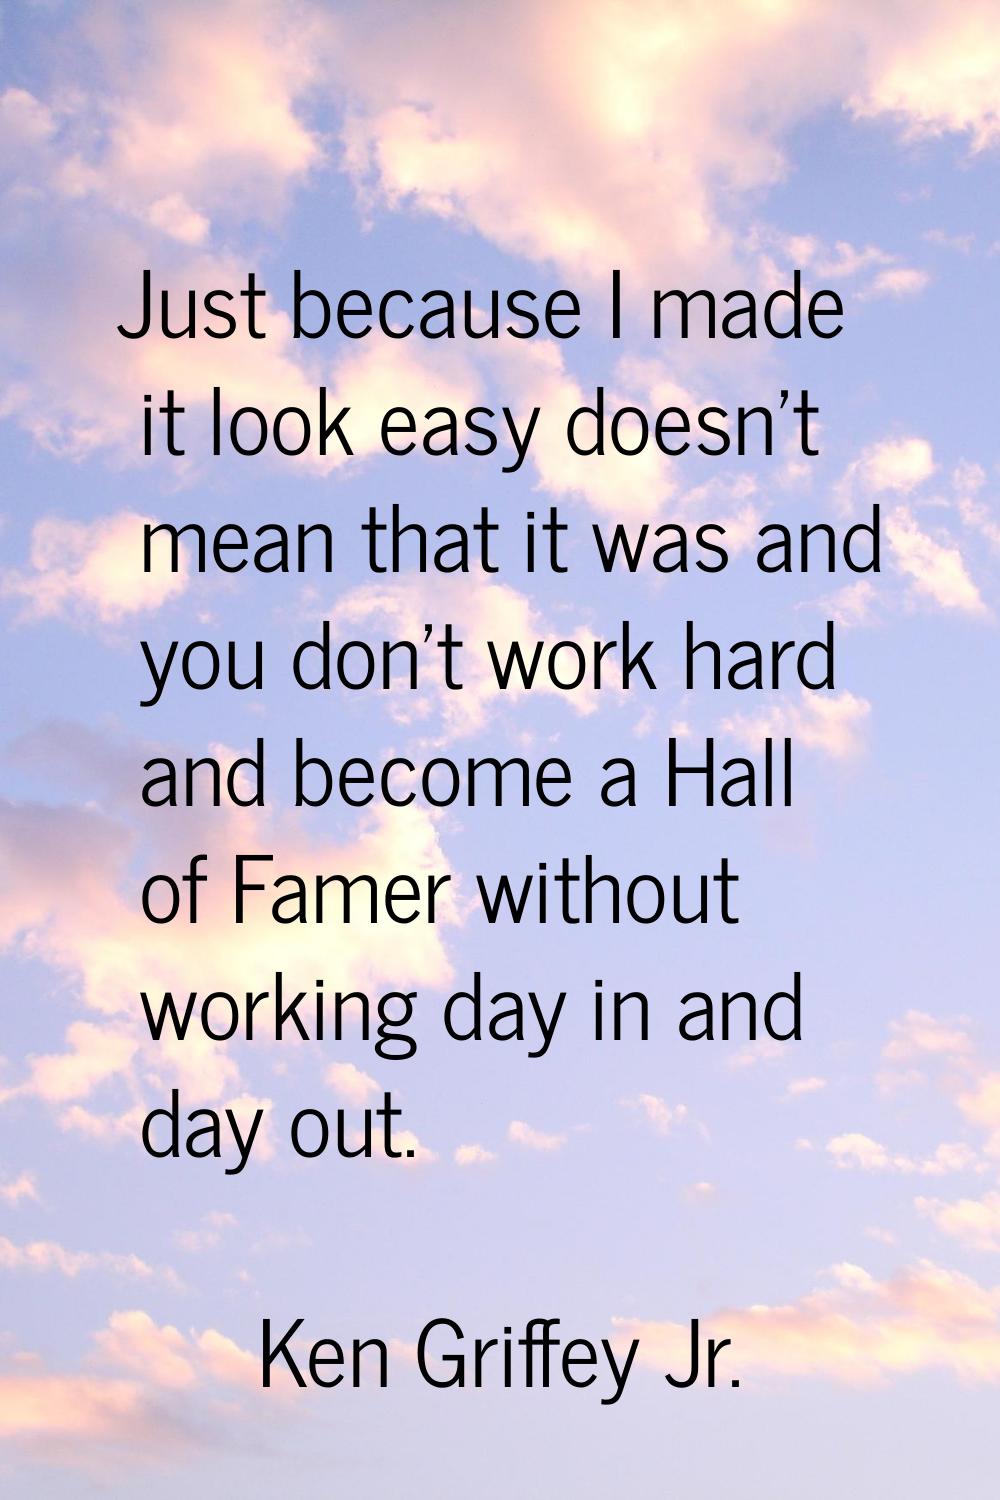 Just because I made it look easy doesn't mean that it was and you don't work hard and become a Hall